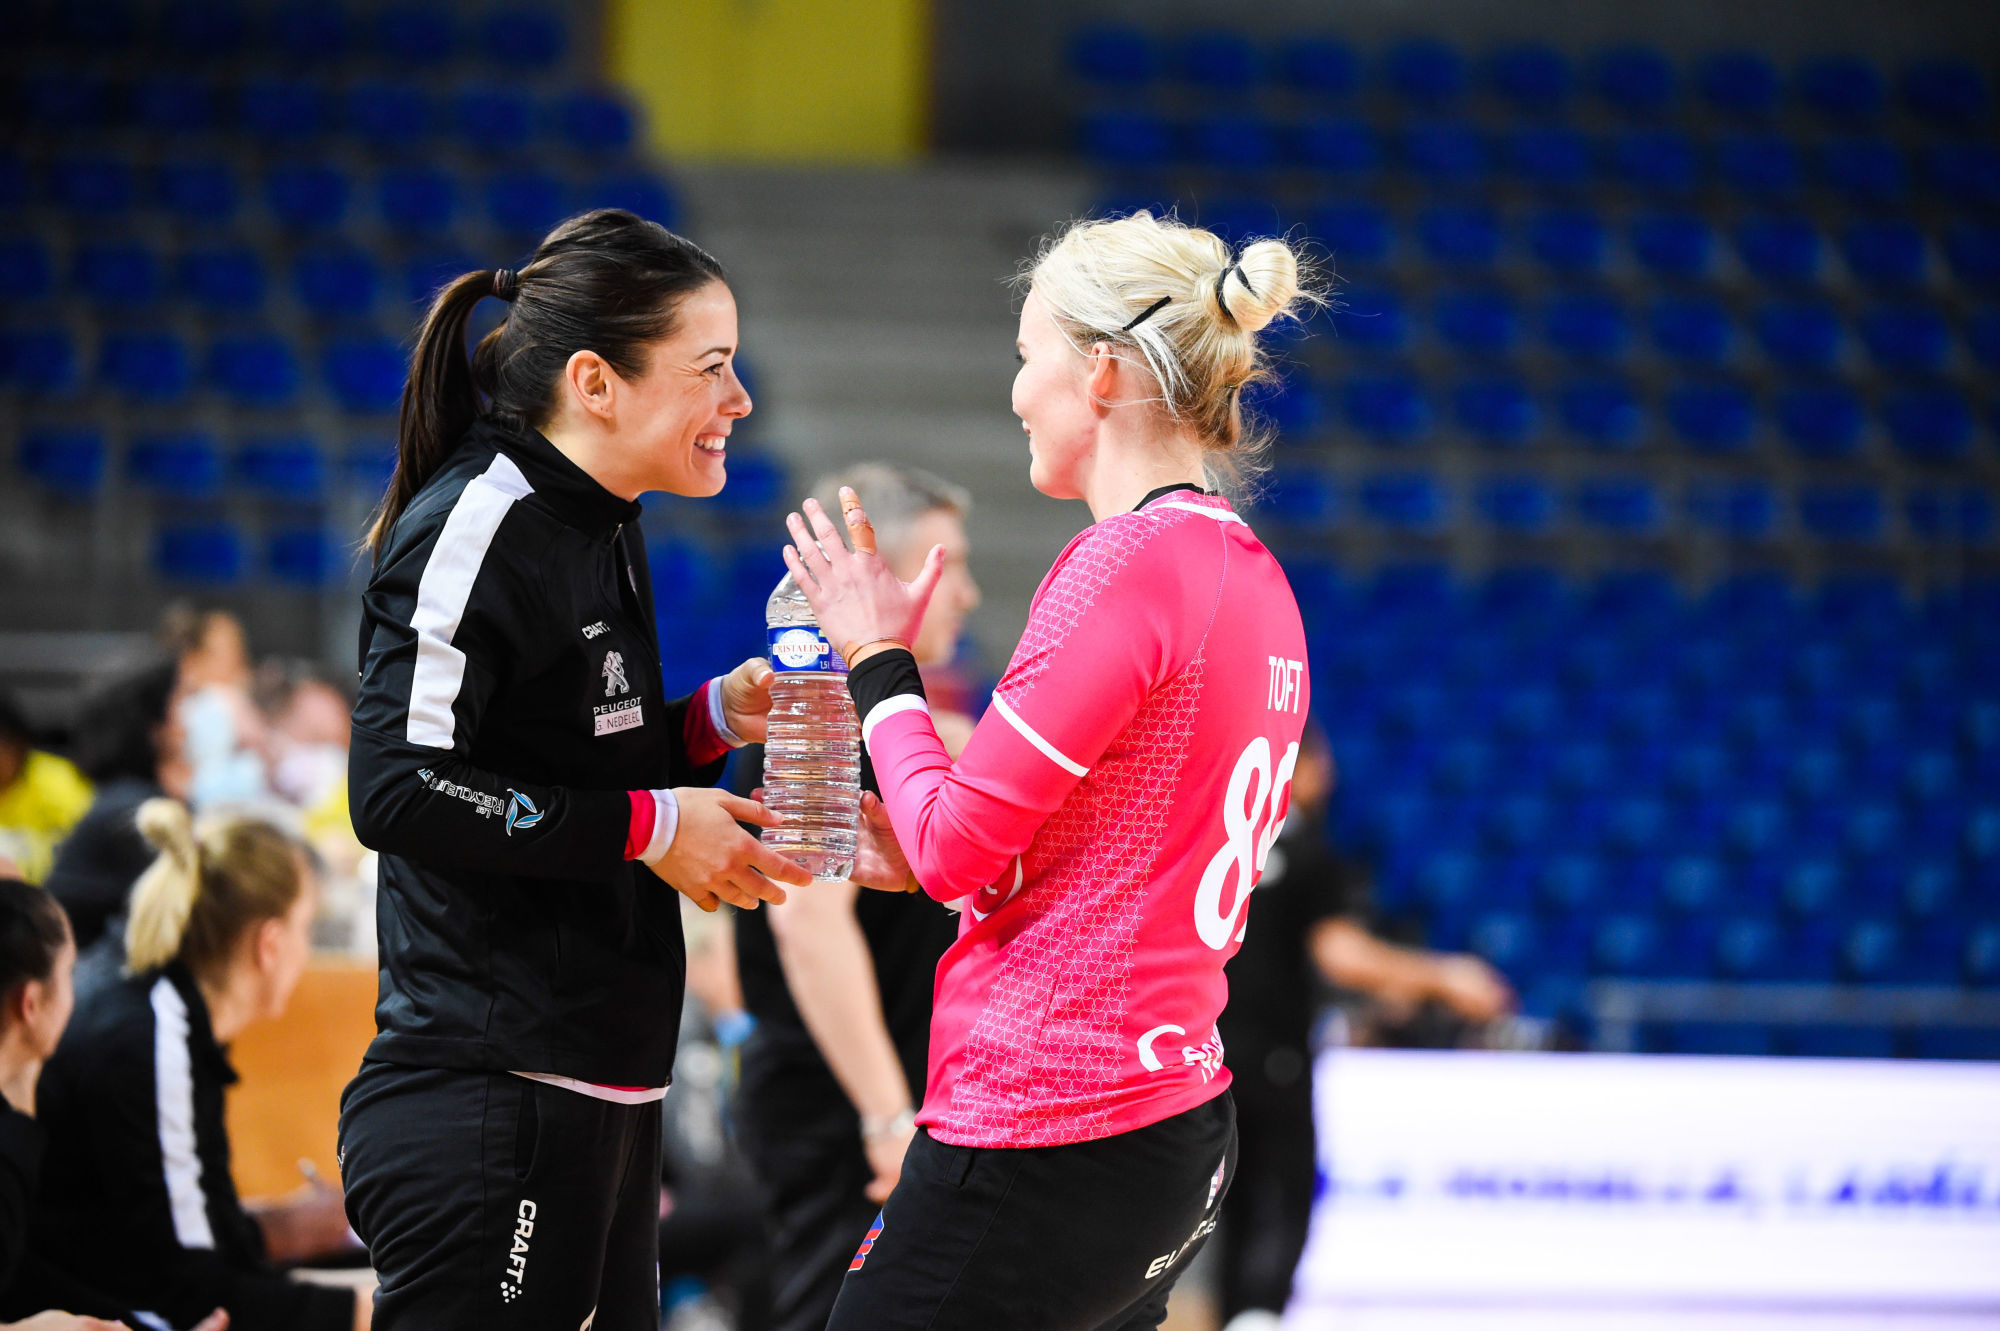 Cleopatre DARLEUX of Brest and Sandra TOFT of Brest during the LFH - Ligue Butagaz Energie match between Metz and Brest on March 28, 2021 in Metz, France. (Photo by Sebastien Bozon/Icon Sport) - Palais Omnisports Les Arenes Metz - Metz (France)